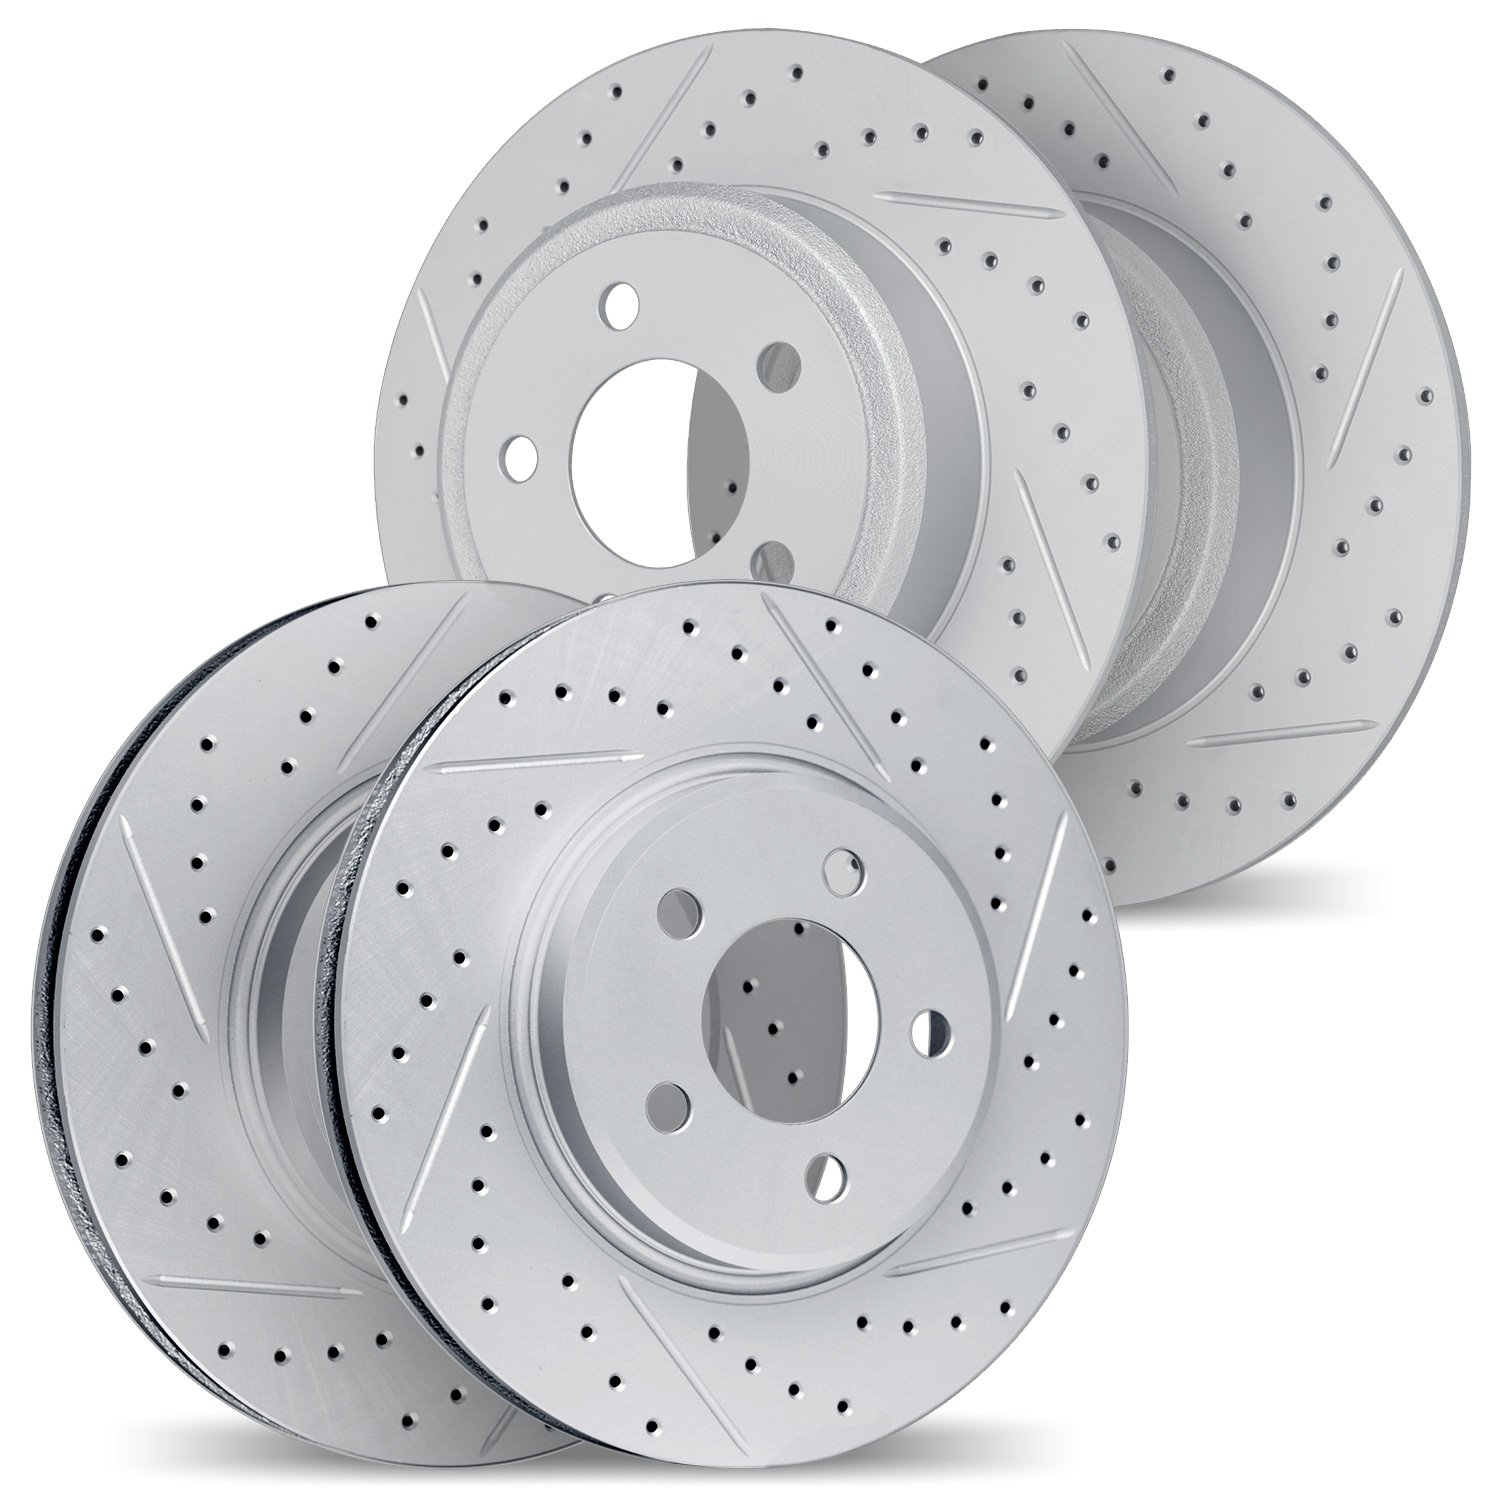 2004-54070 Geoperformance Drilled/Slotted Brake Rotors, 2003-2005 Ford/Lincoln/Mercury/Mazda, Position: Front and Rear